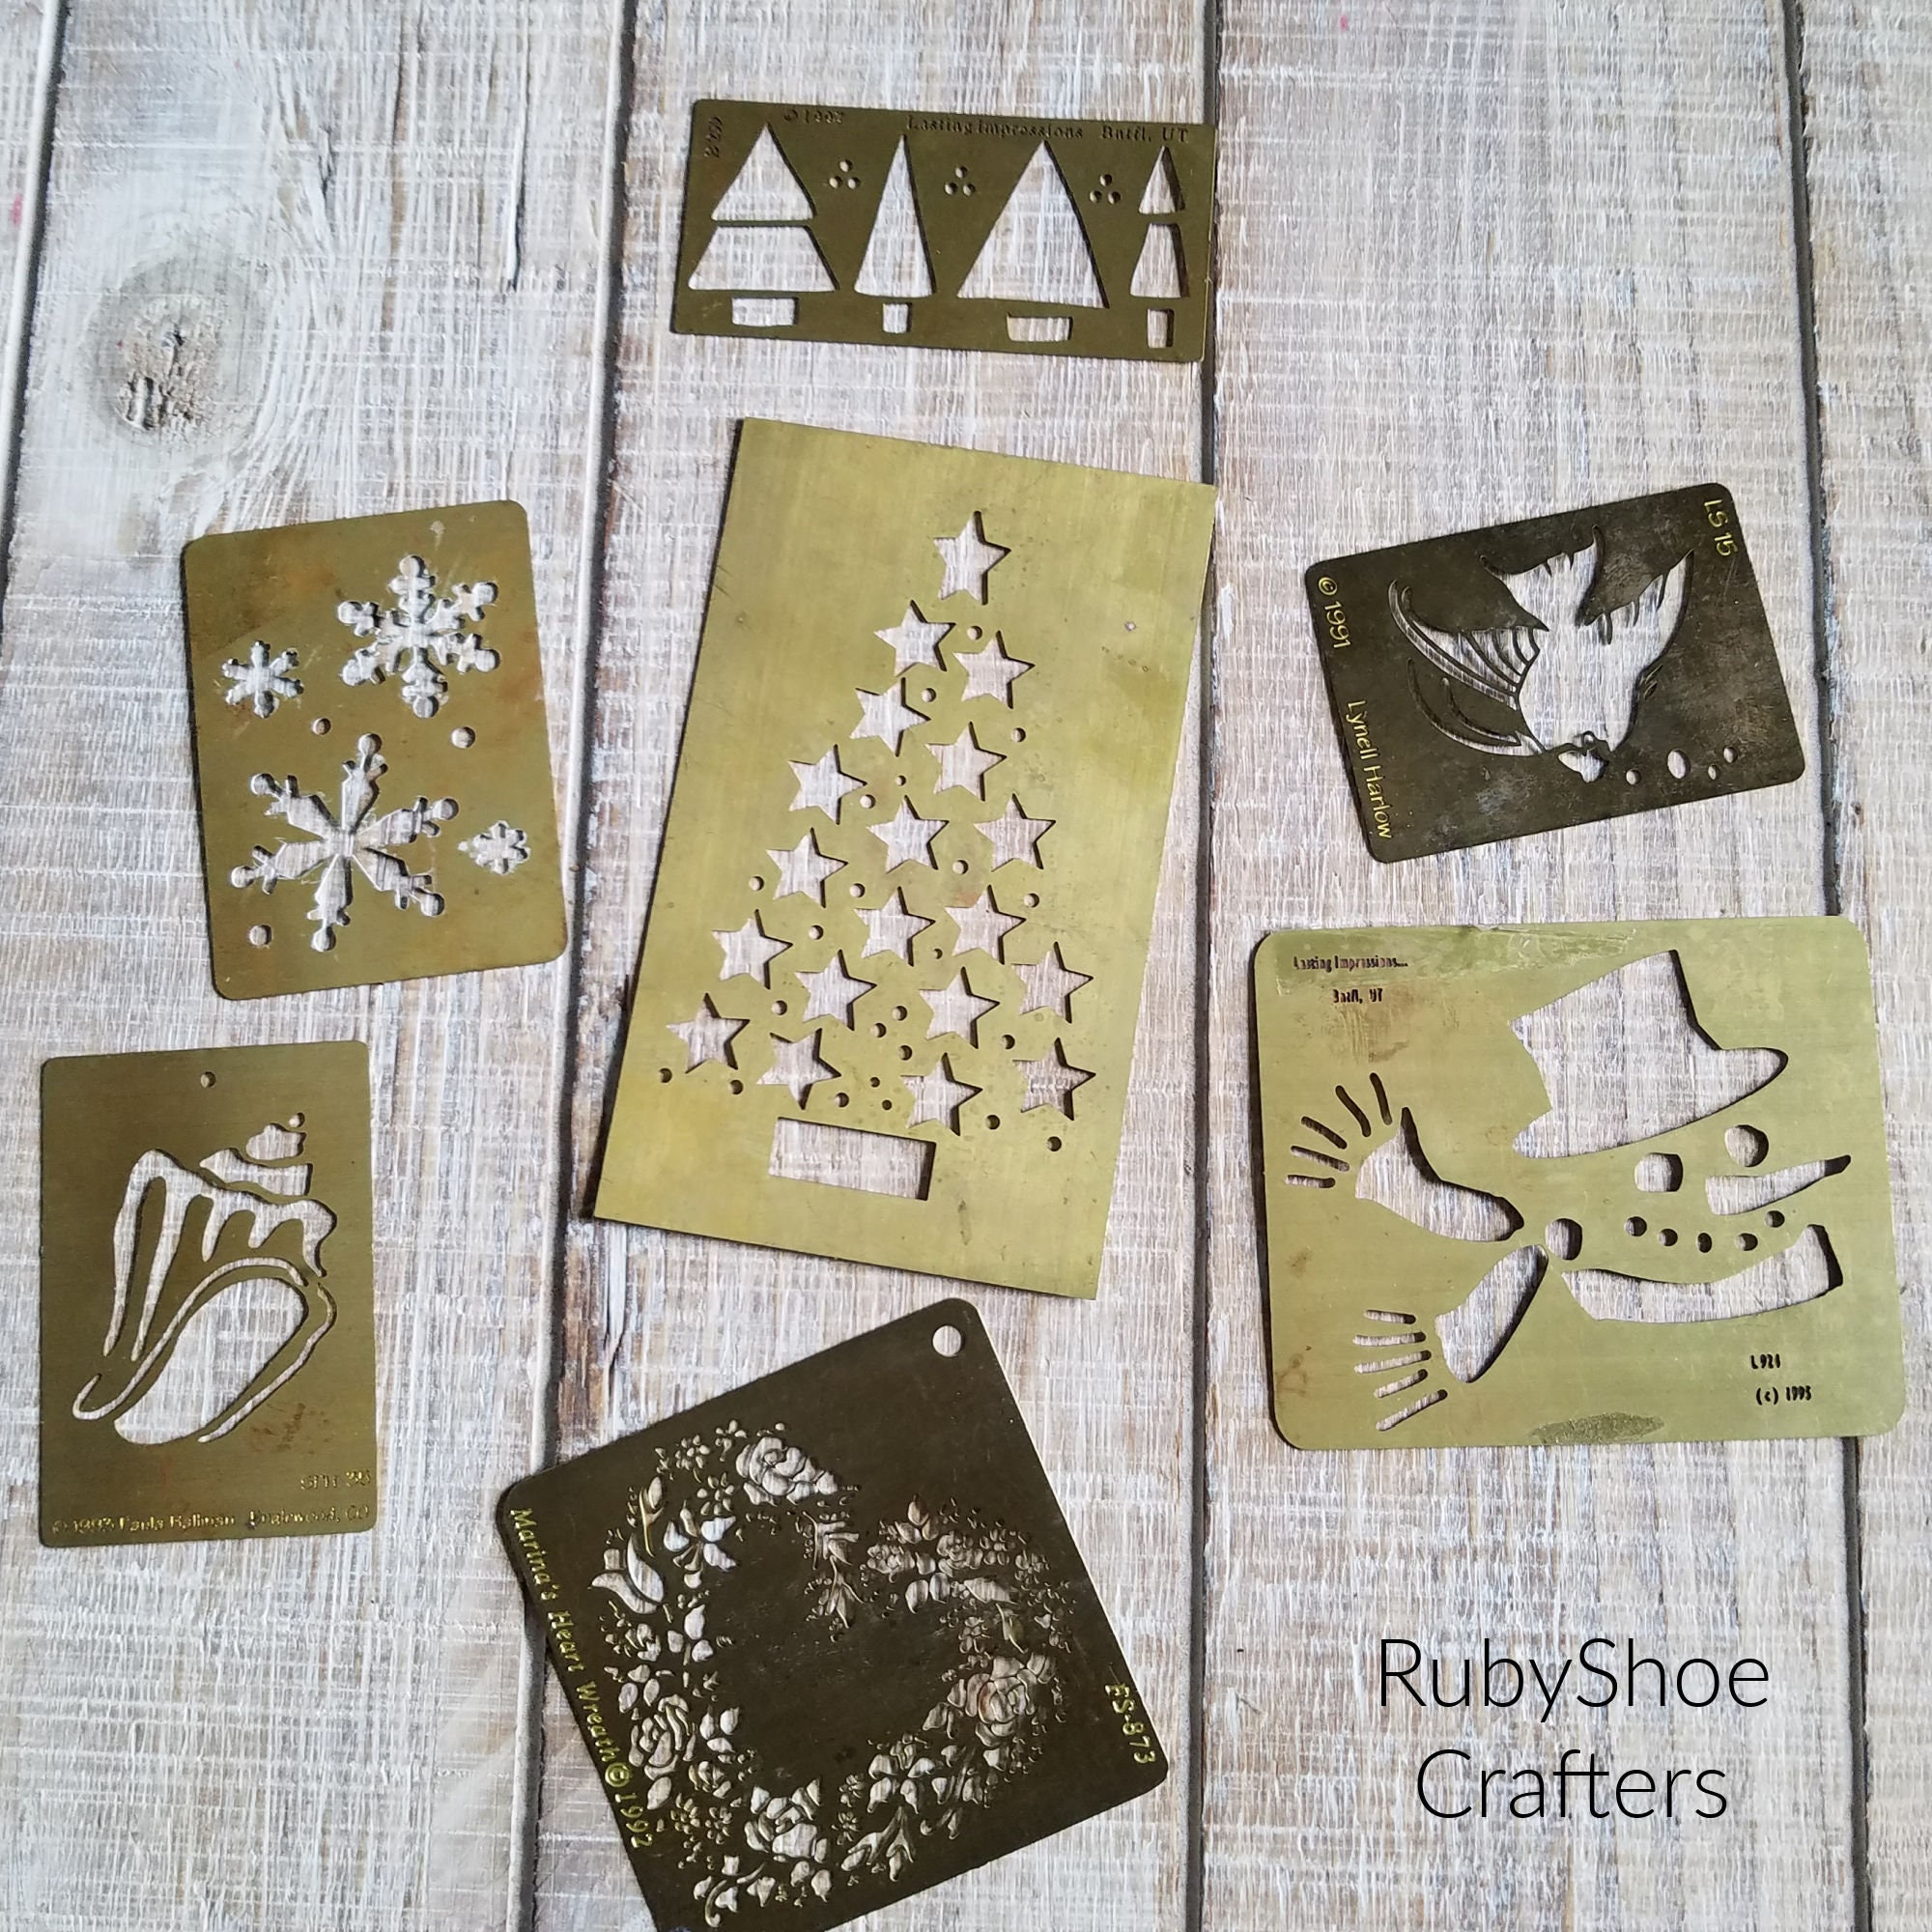 Solid Brass Embossing Templates & Papers – Lasting Impressions for Paper